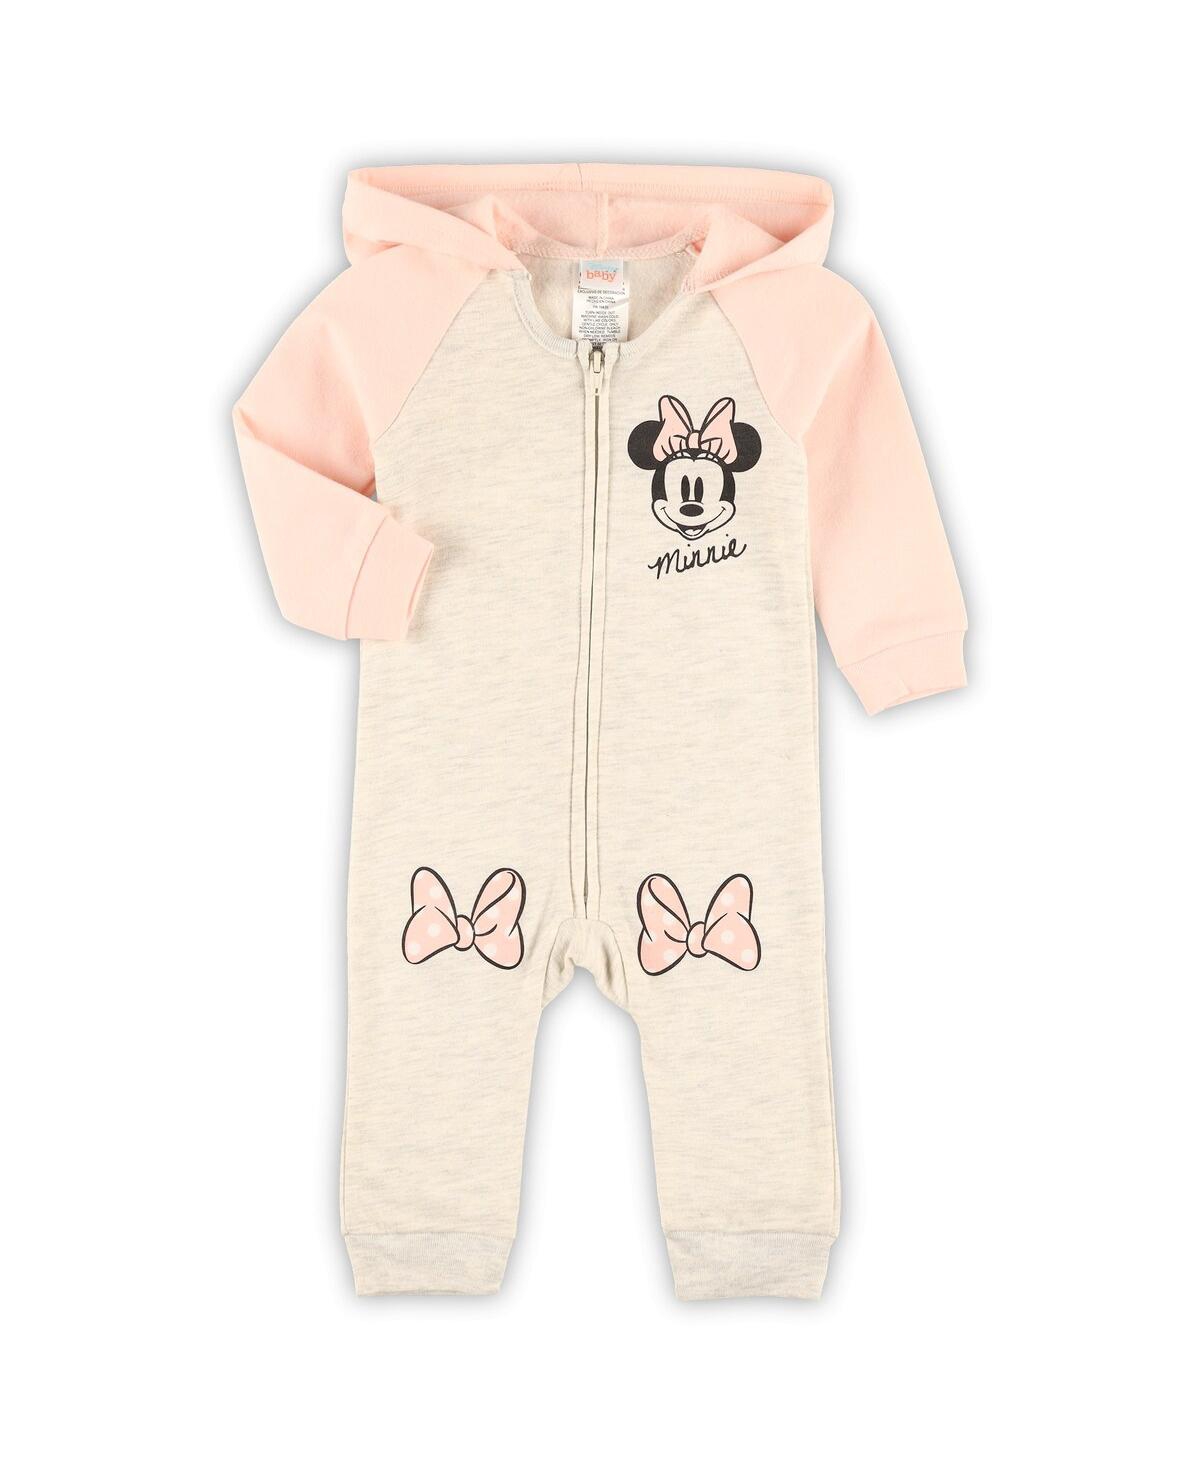 Shop Children's Apparel Network Baby Boys And Girls Minnie Mouse Heather Gray Hoodie Full-zip Jumper